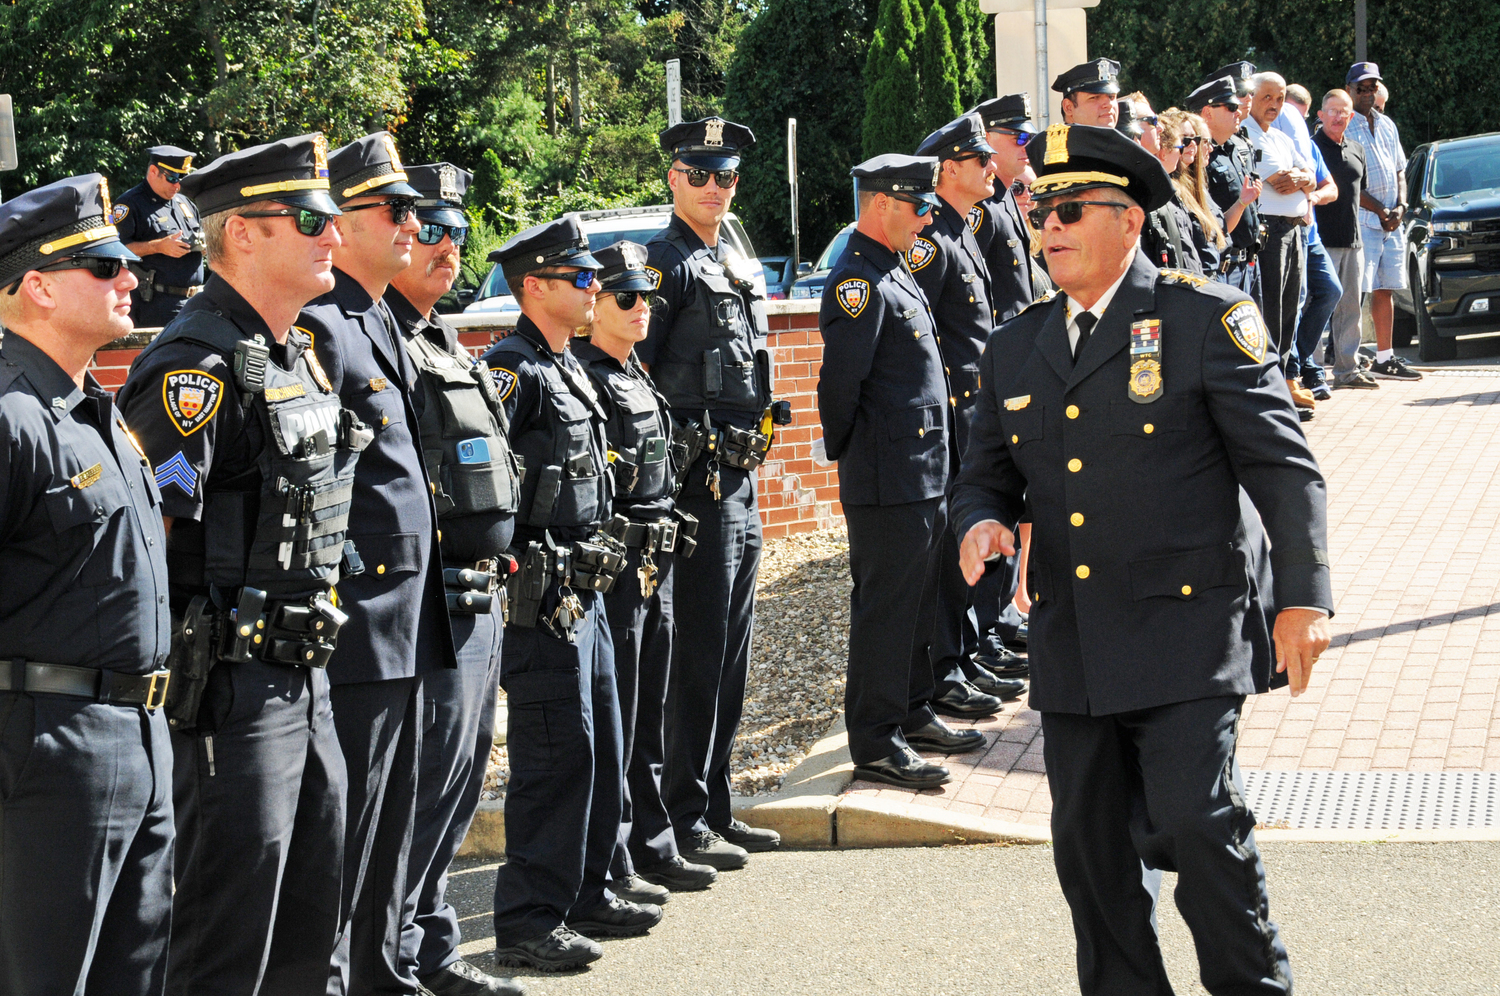 East Hampton Village Police Department Chief Michael Tracey, who stepped down from his post last week after 40 years on the village police force, was honored by Mayor Jerry Larsen and other police officers at a 